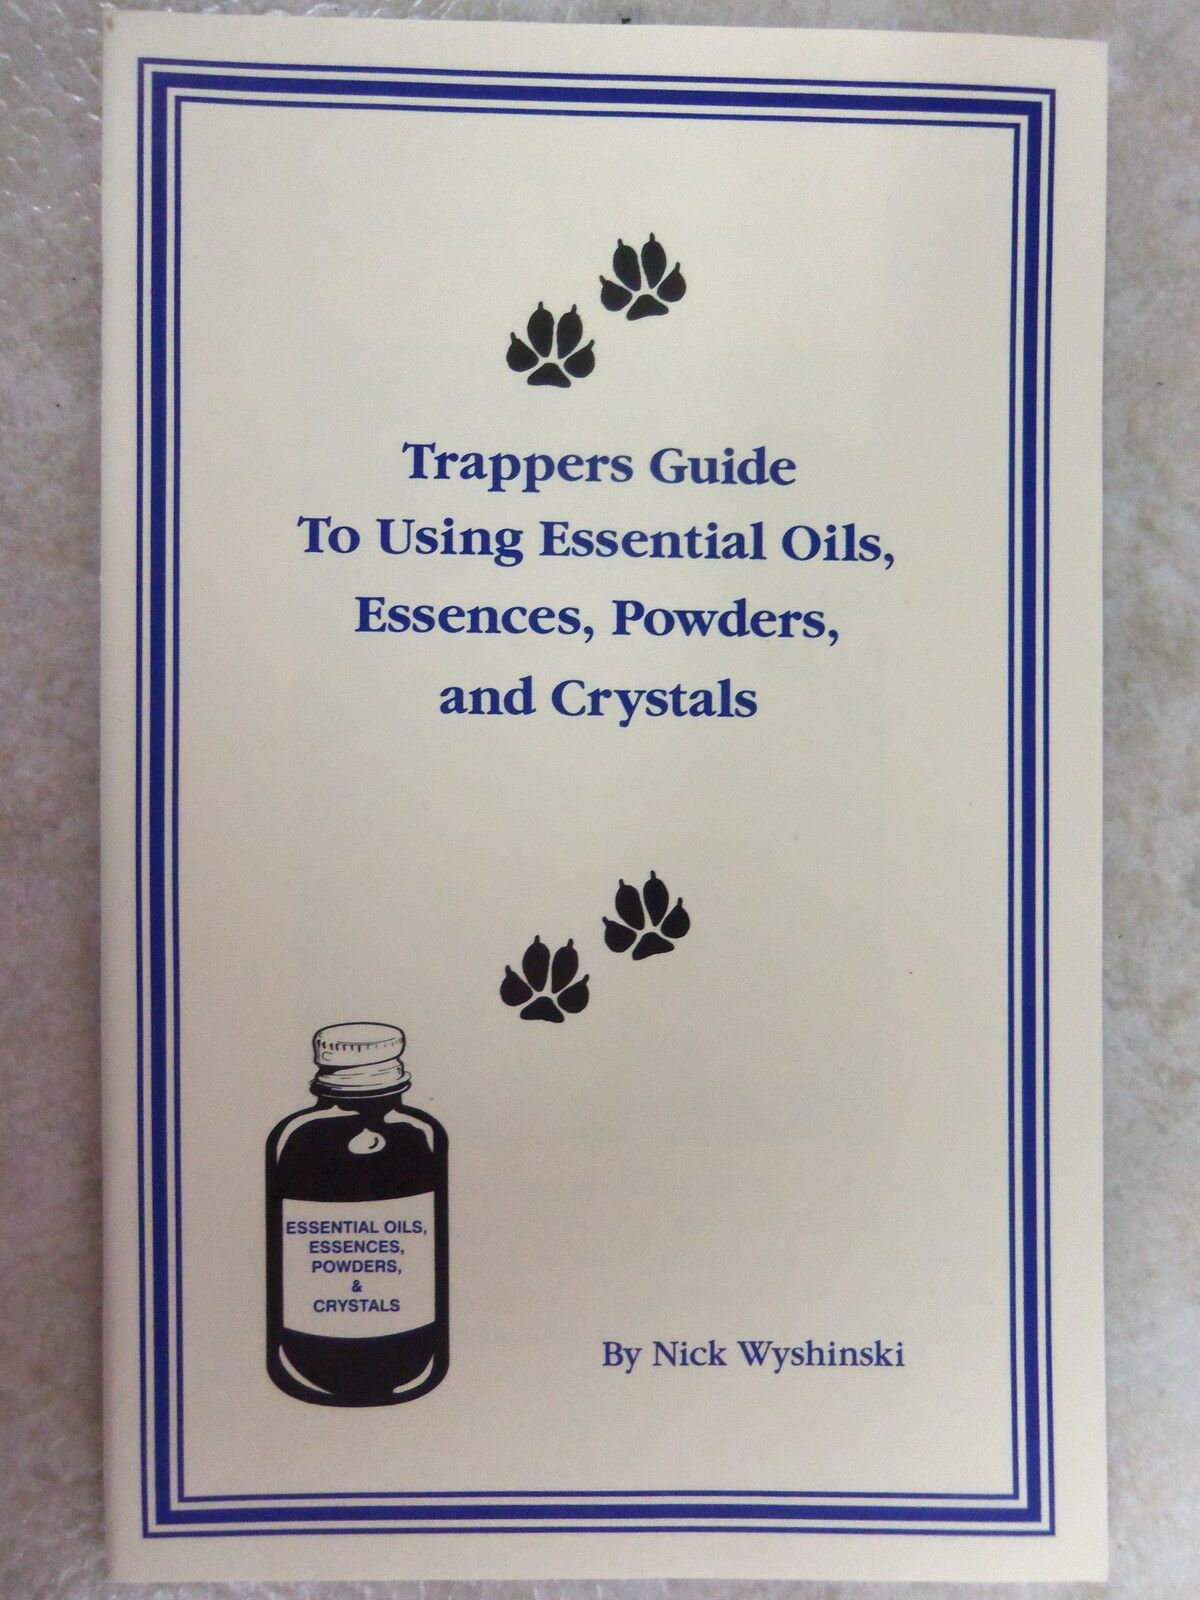 Book "Trappers Guide To Using Essential Oils Essences Powders Crystal" Wyshinski - $14.84